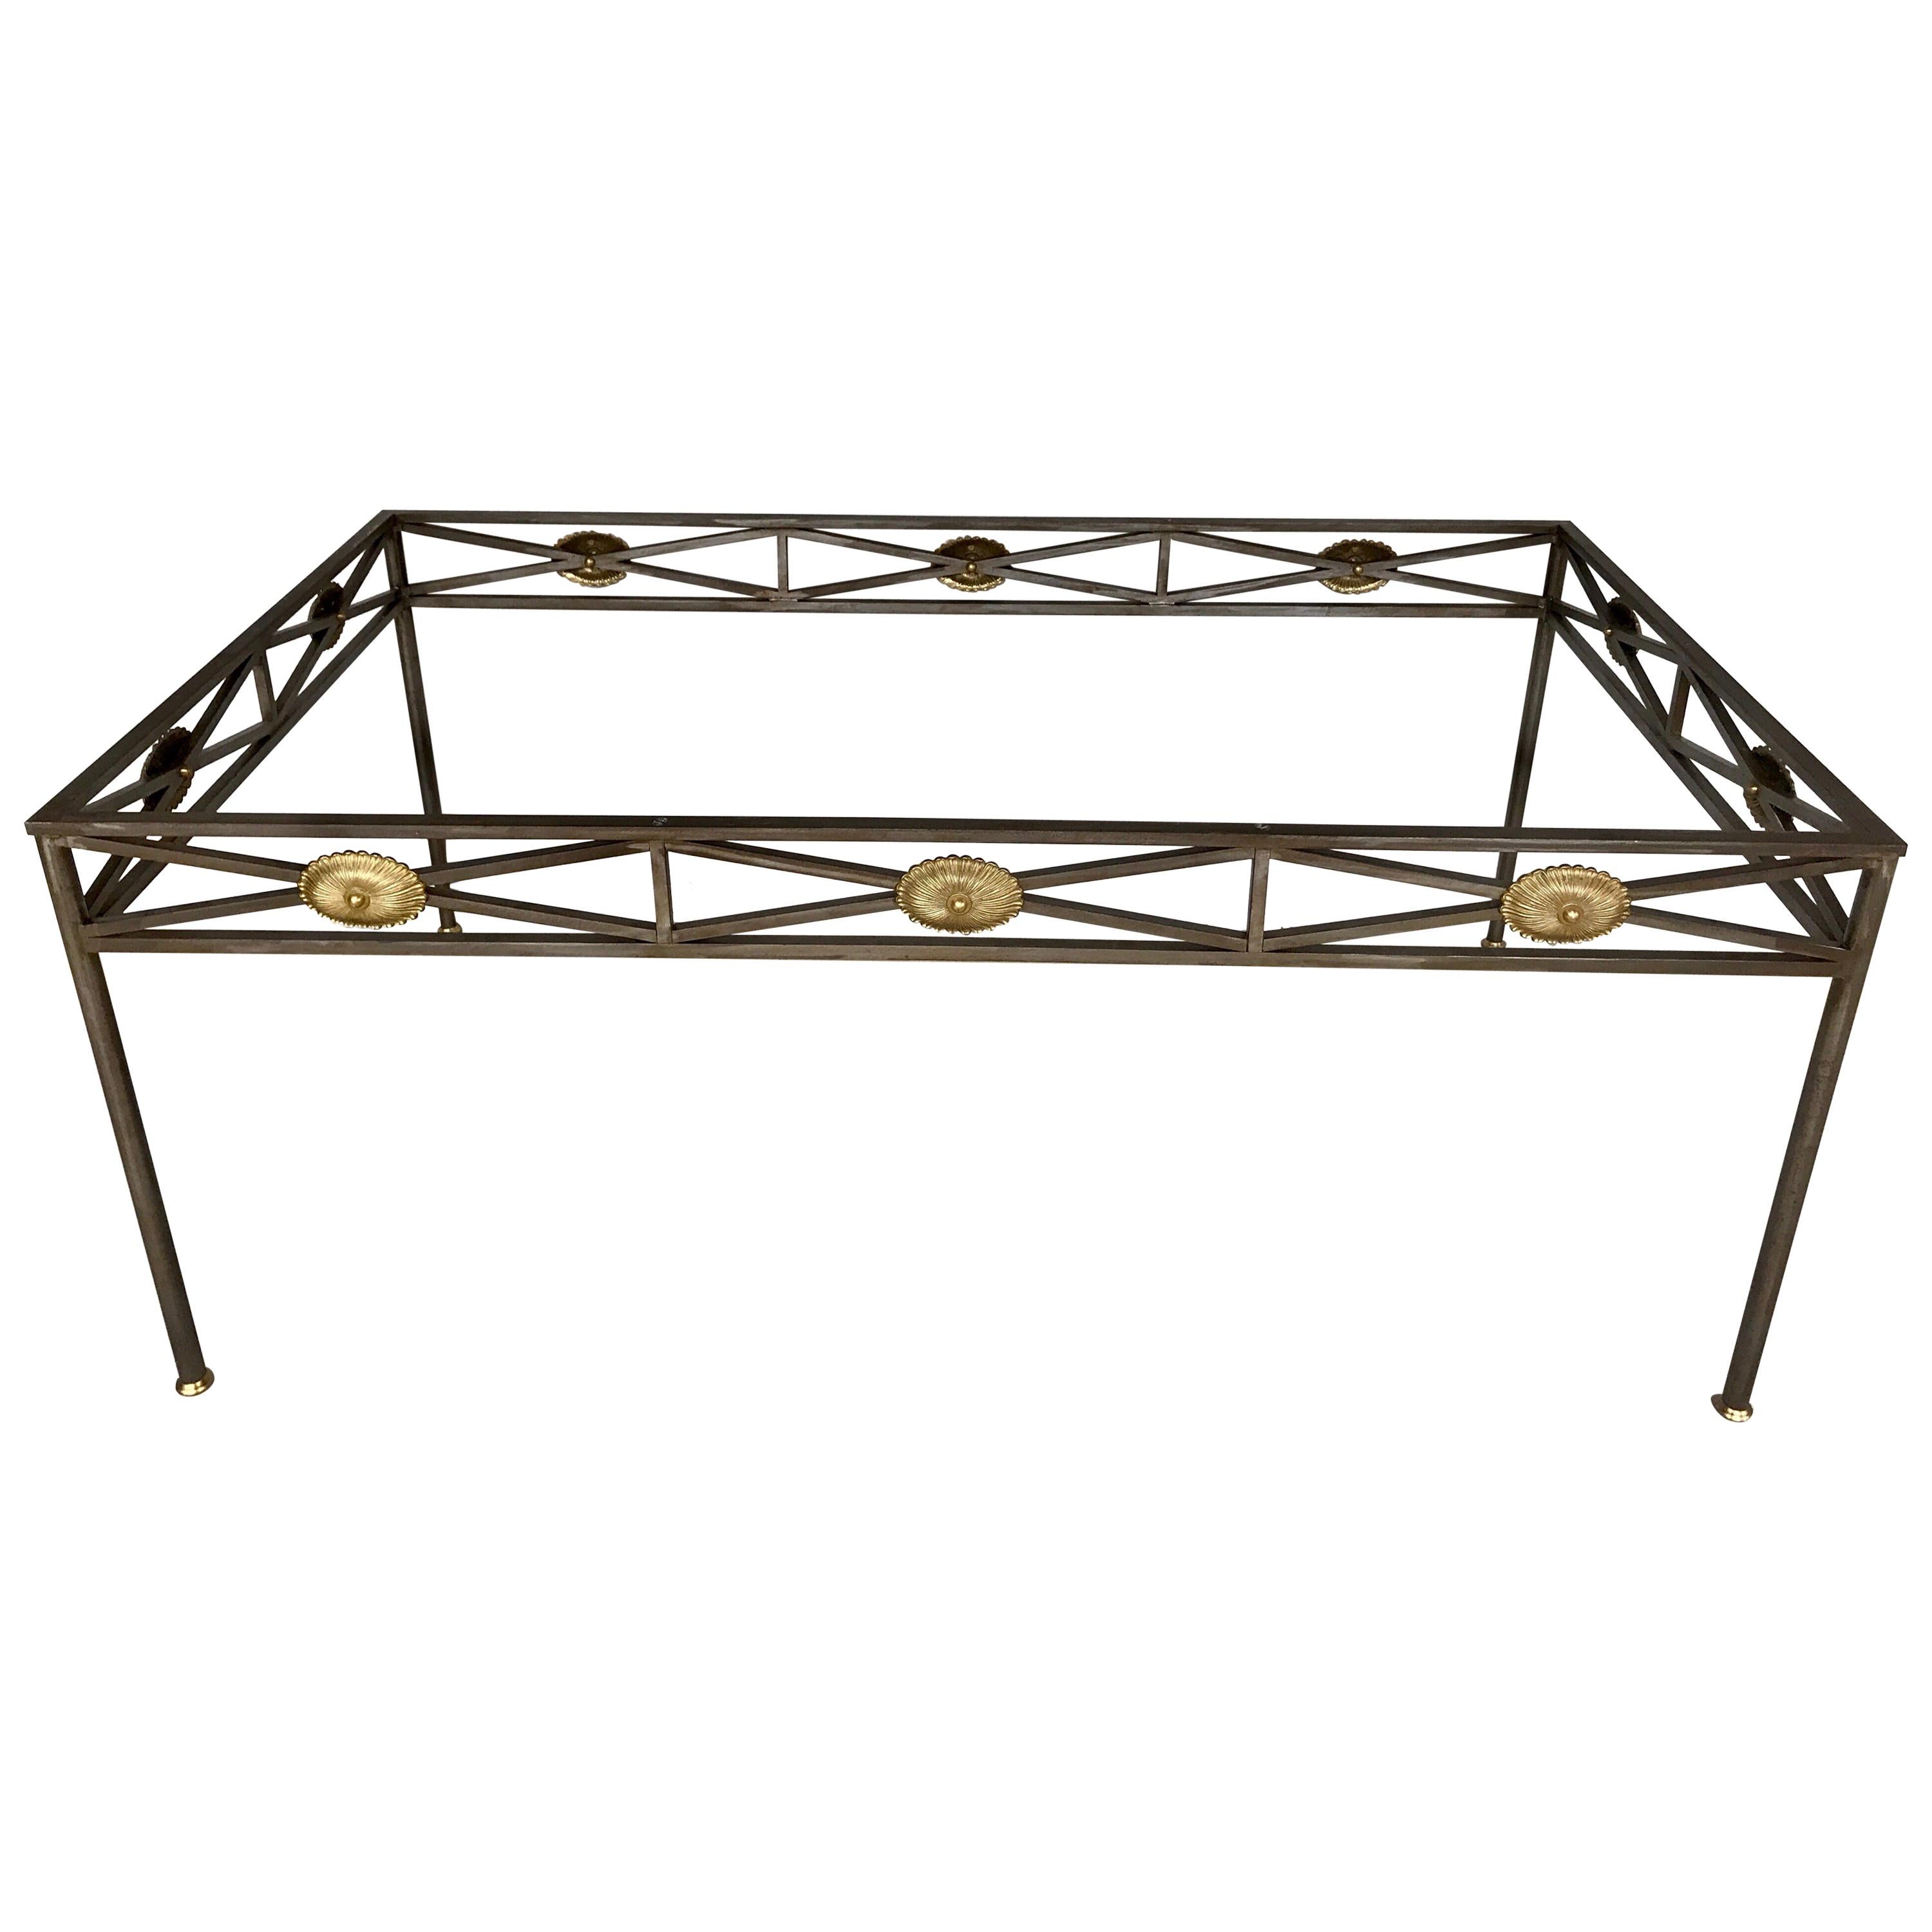 Maison Jansen Style Neoclassical Steel and Bronze Dining Table Base For Sale